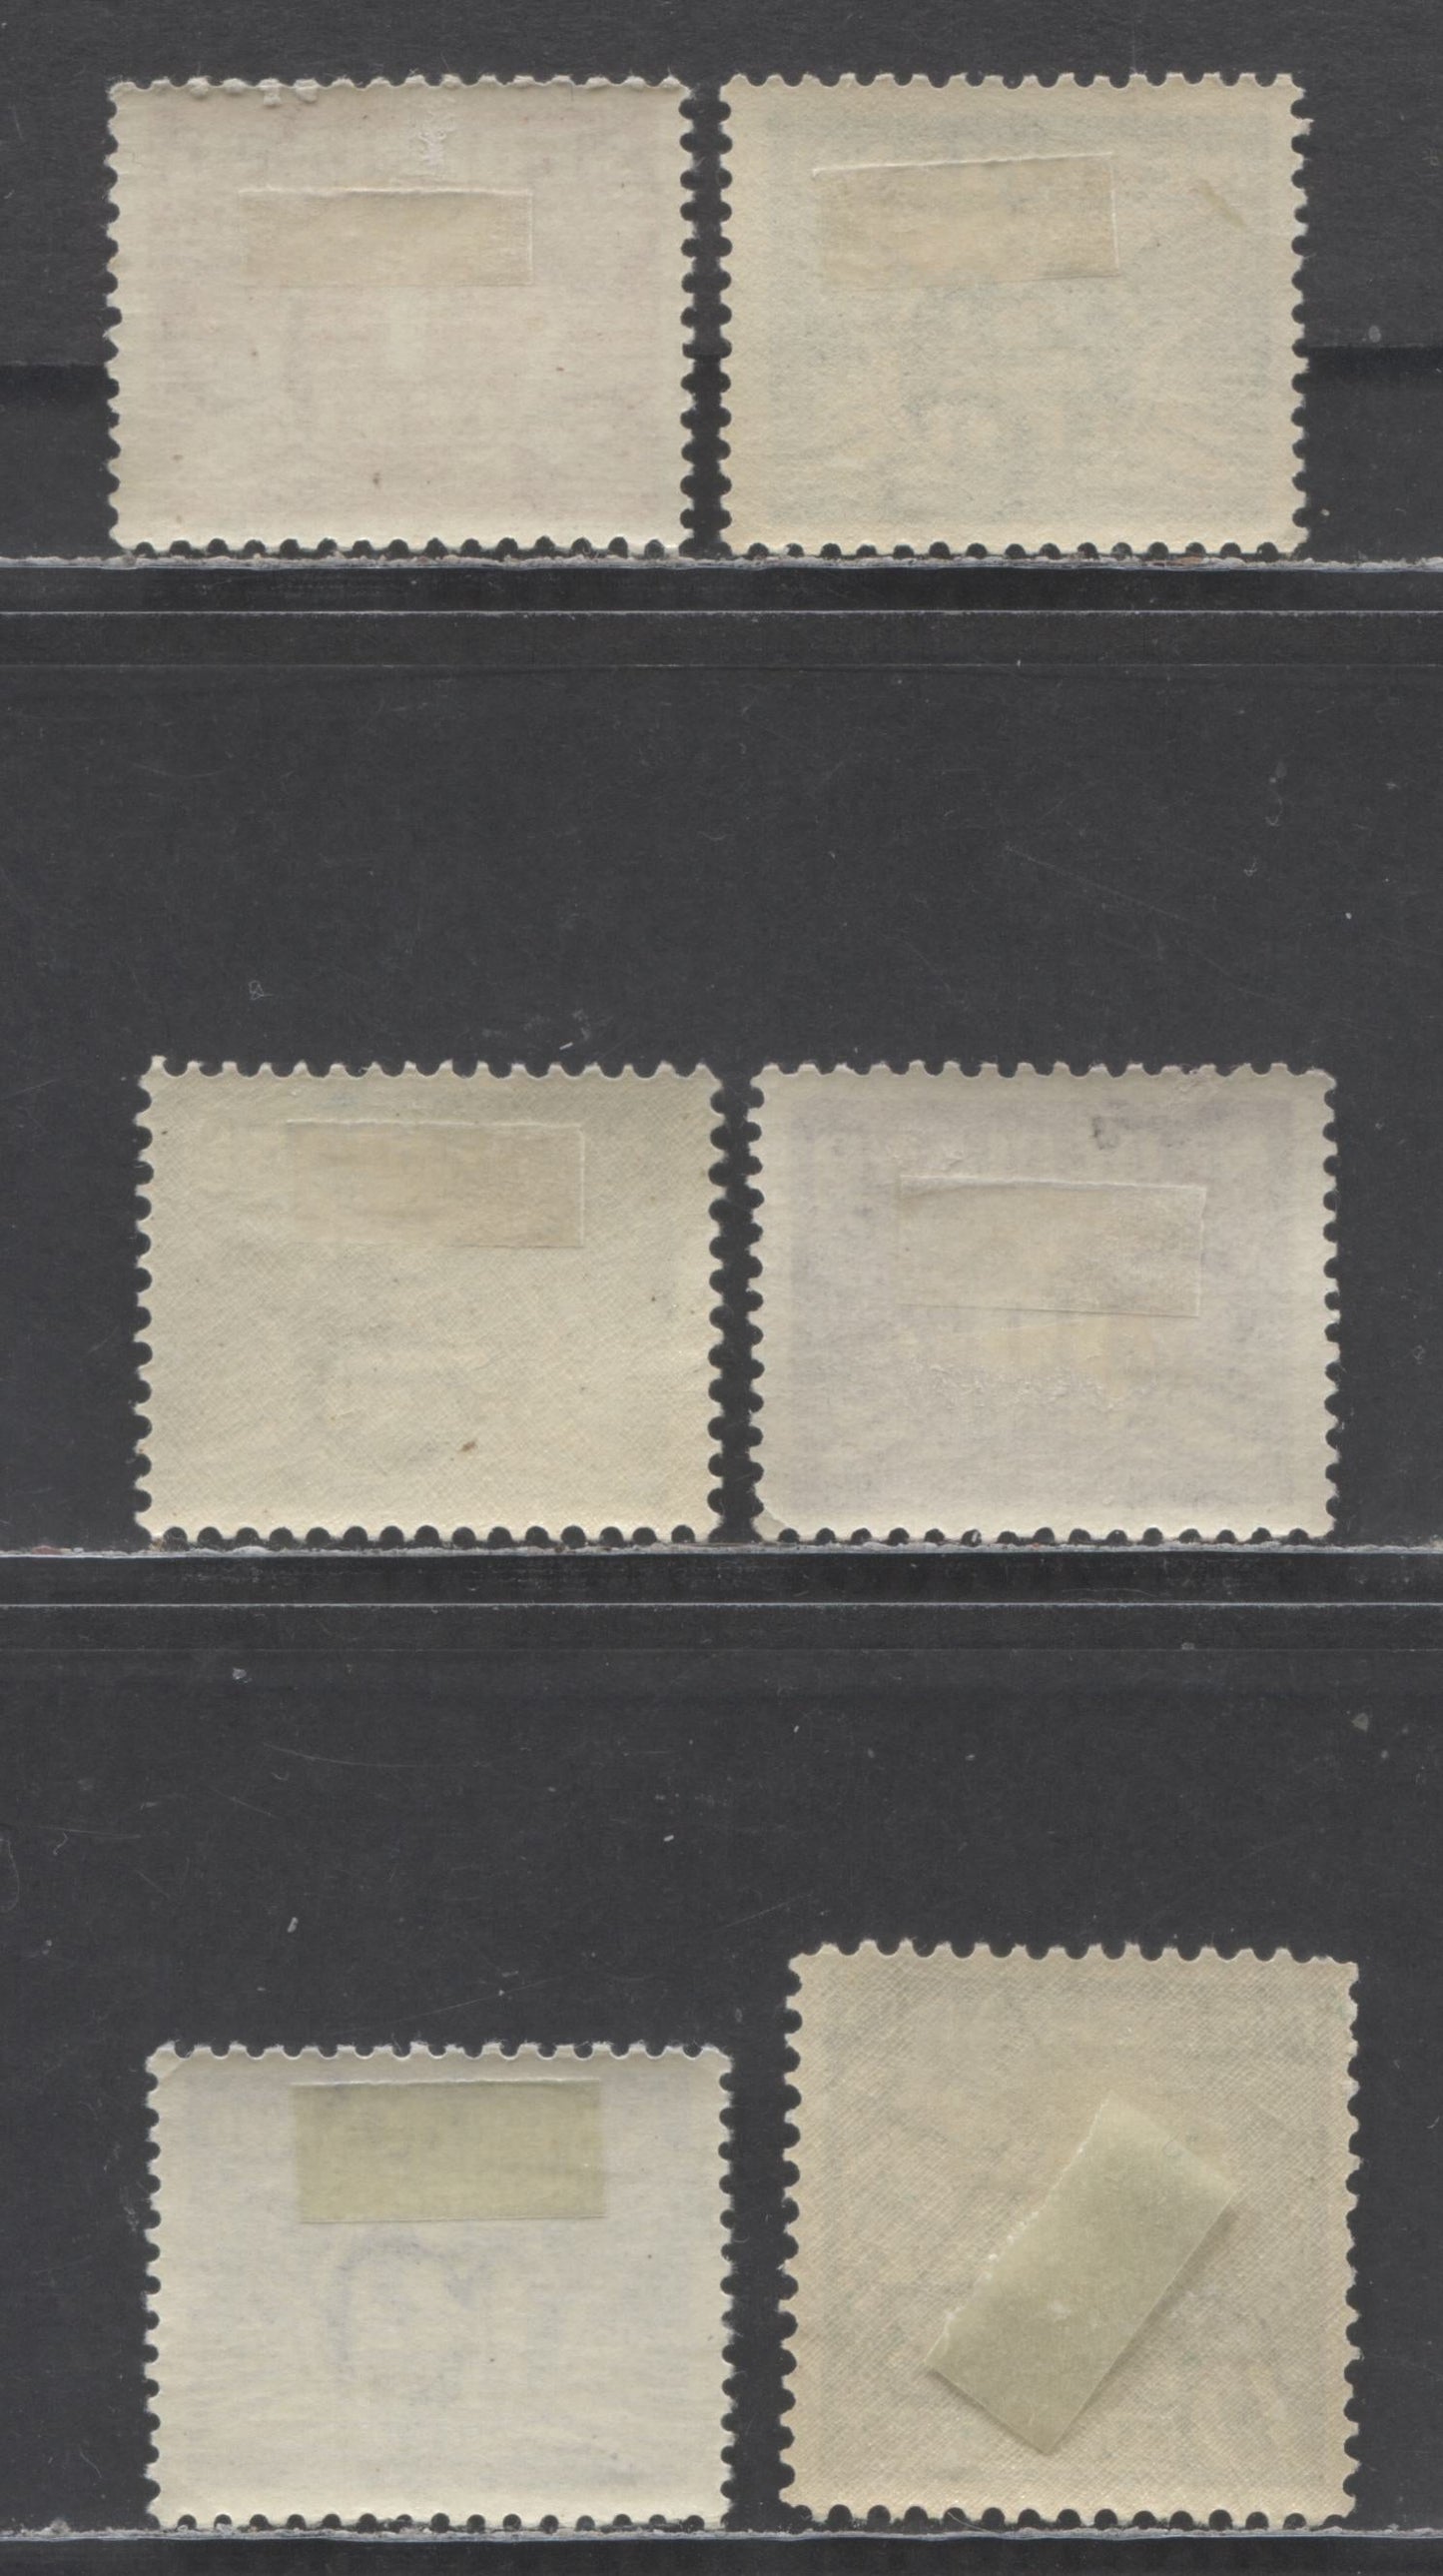 Lot 97 Netherlands SC#165/C5 1926-1939 Gull, Queen Wilhelmina Definitives & Airmails, Multiple Circles Wmk, 6 VFOG Singles, Click on Listing to See ALL Pictures, Estimated Value $7